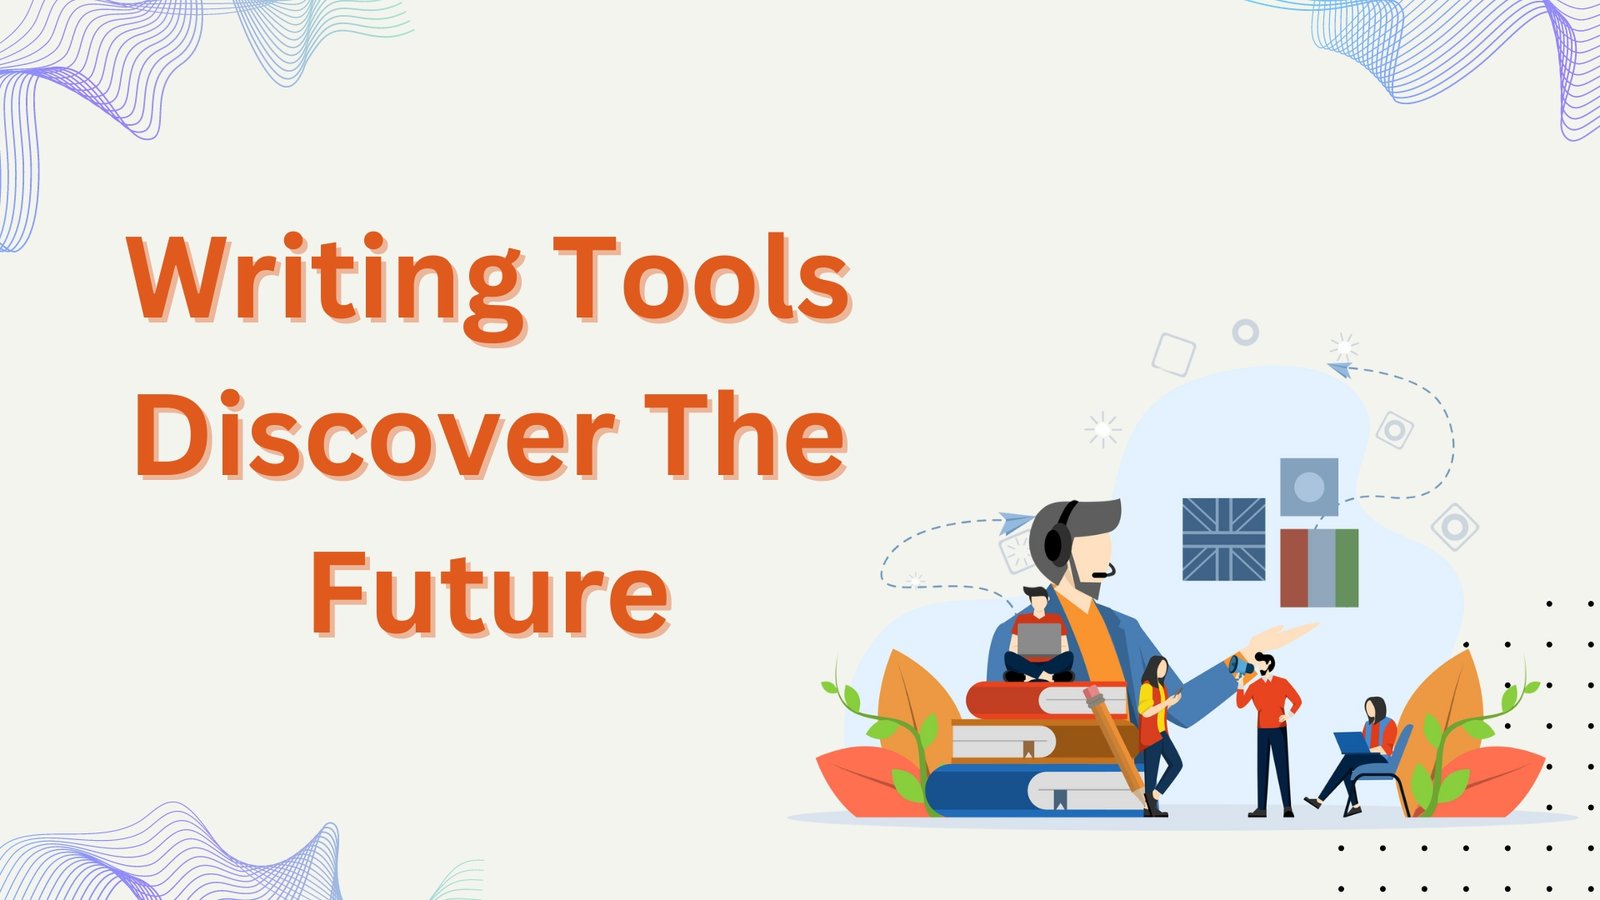 Writing Tools - Discover The Future